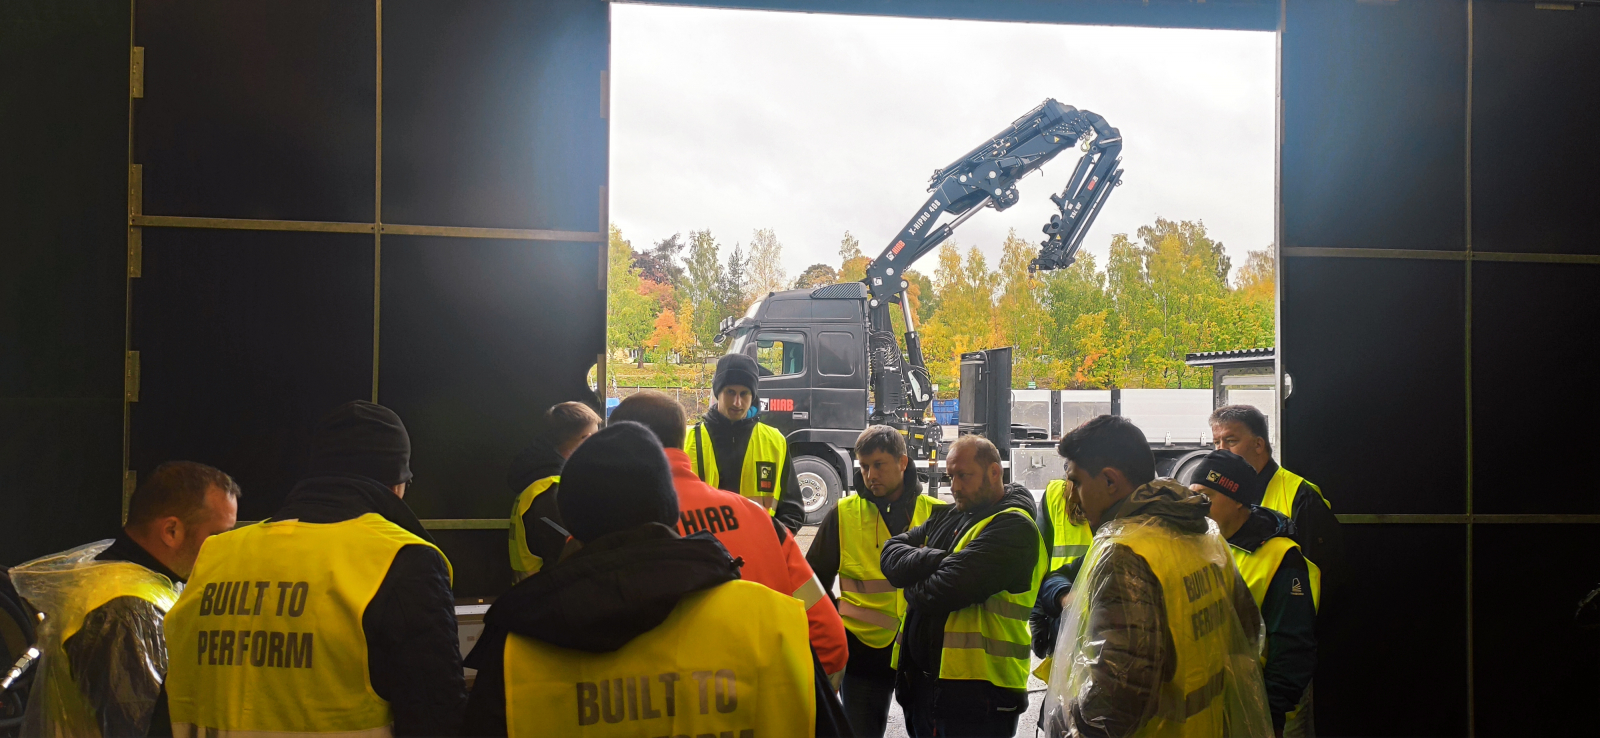 We participated in service training at Hiab's training and testing center